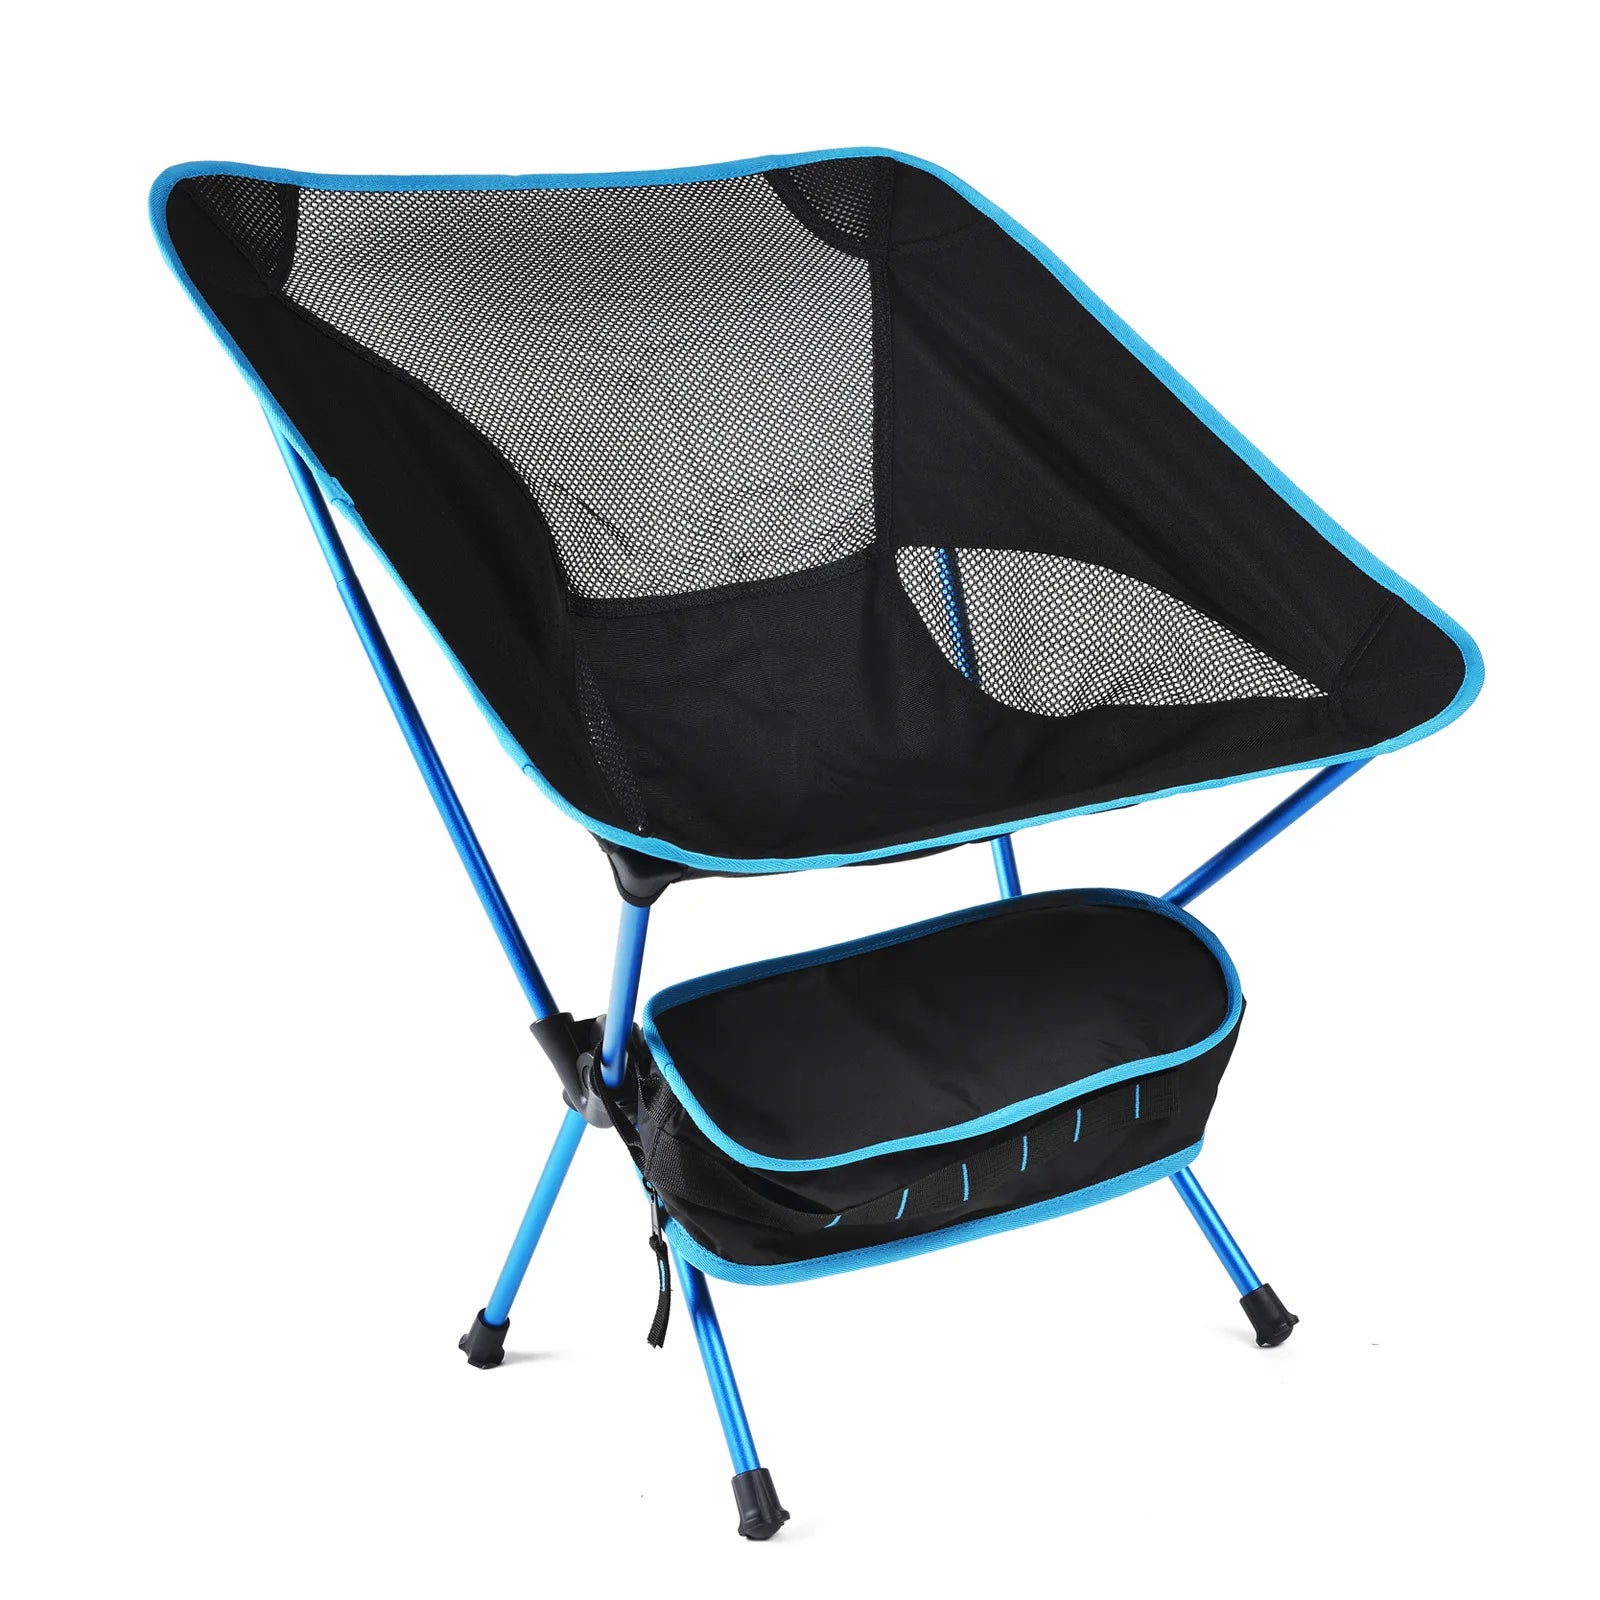 Stable and Lightweight Folding Camping Chair Portable and Compact